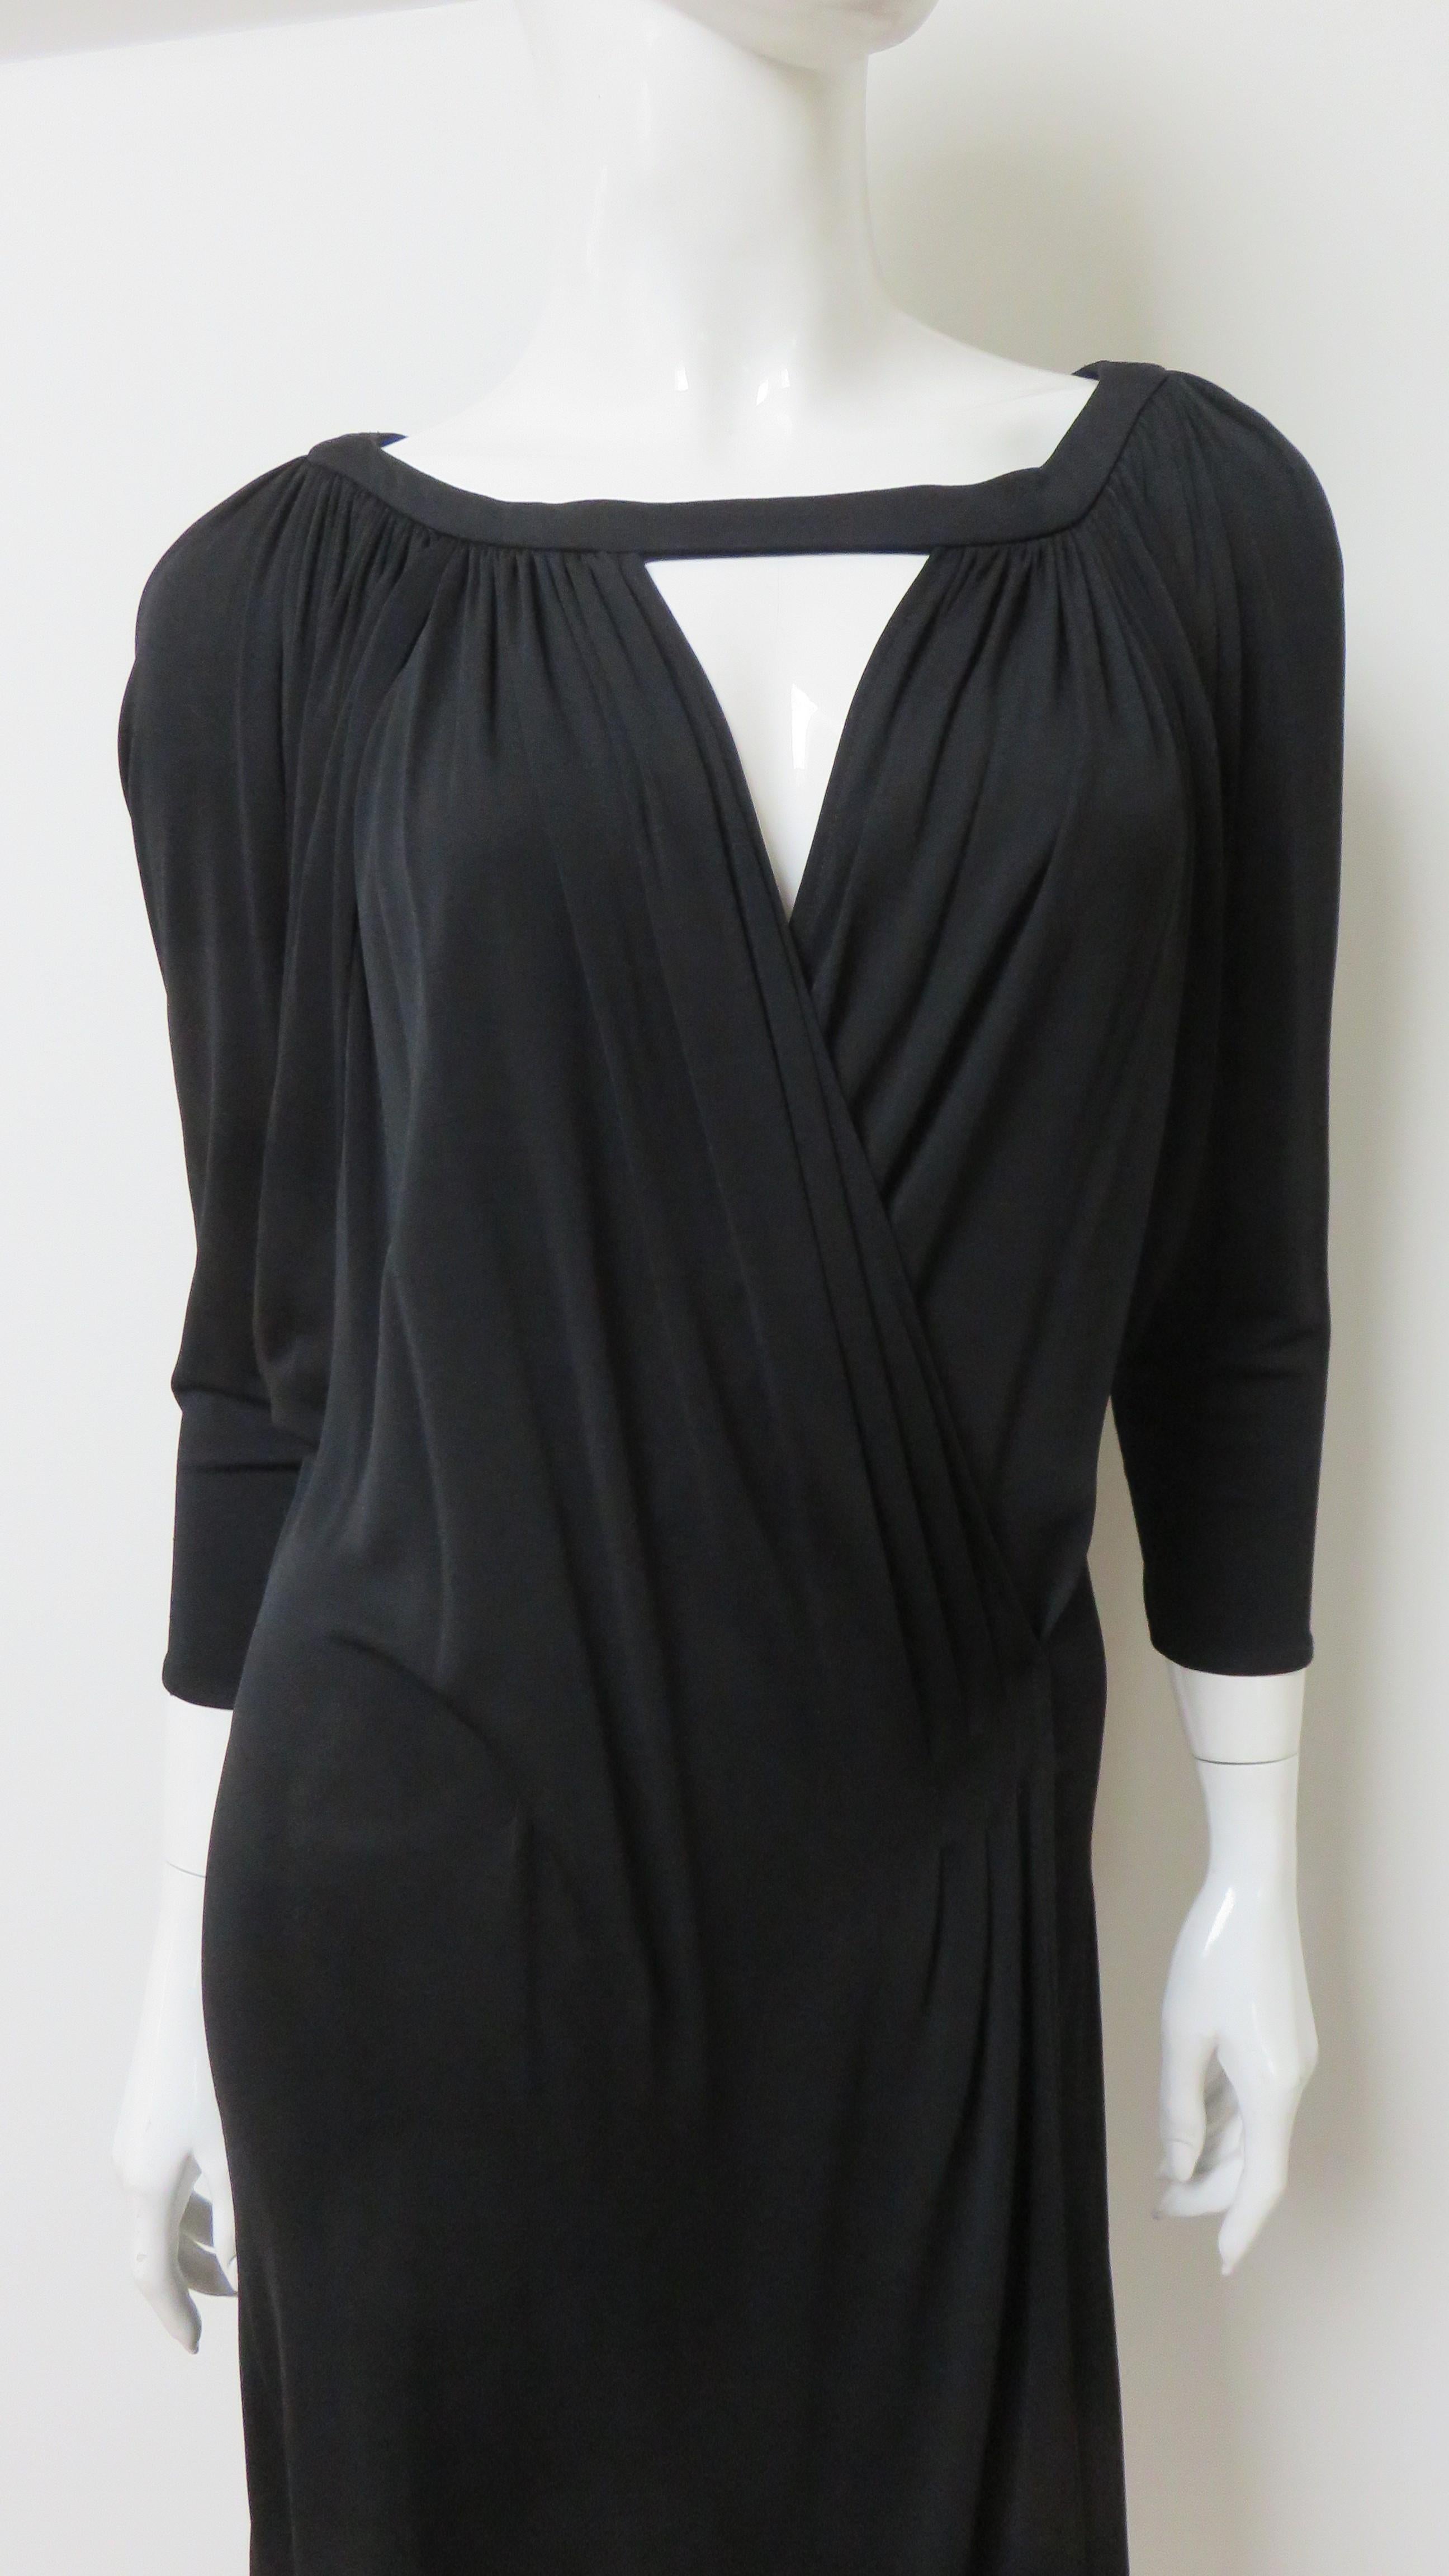 Gianni Versace Silk Cut out Dress In Good Condition For Sale In Water Mill, NY